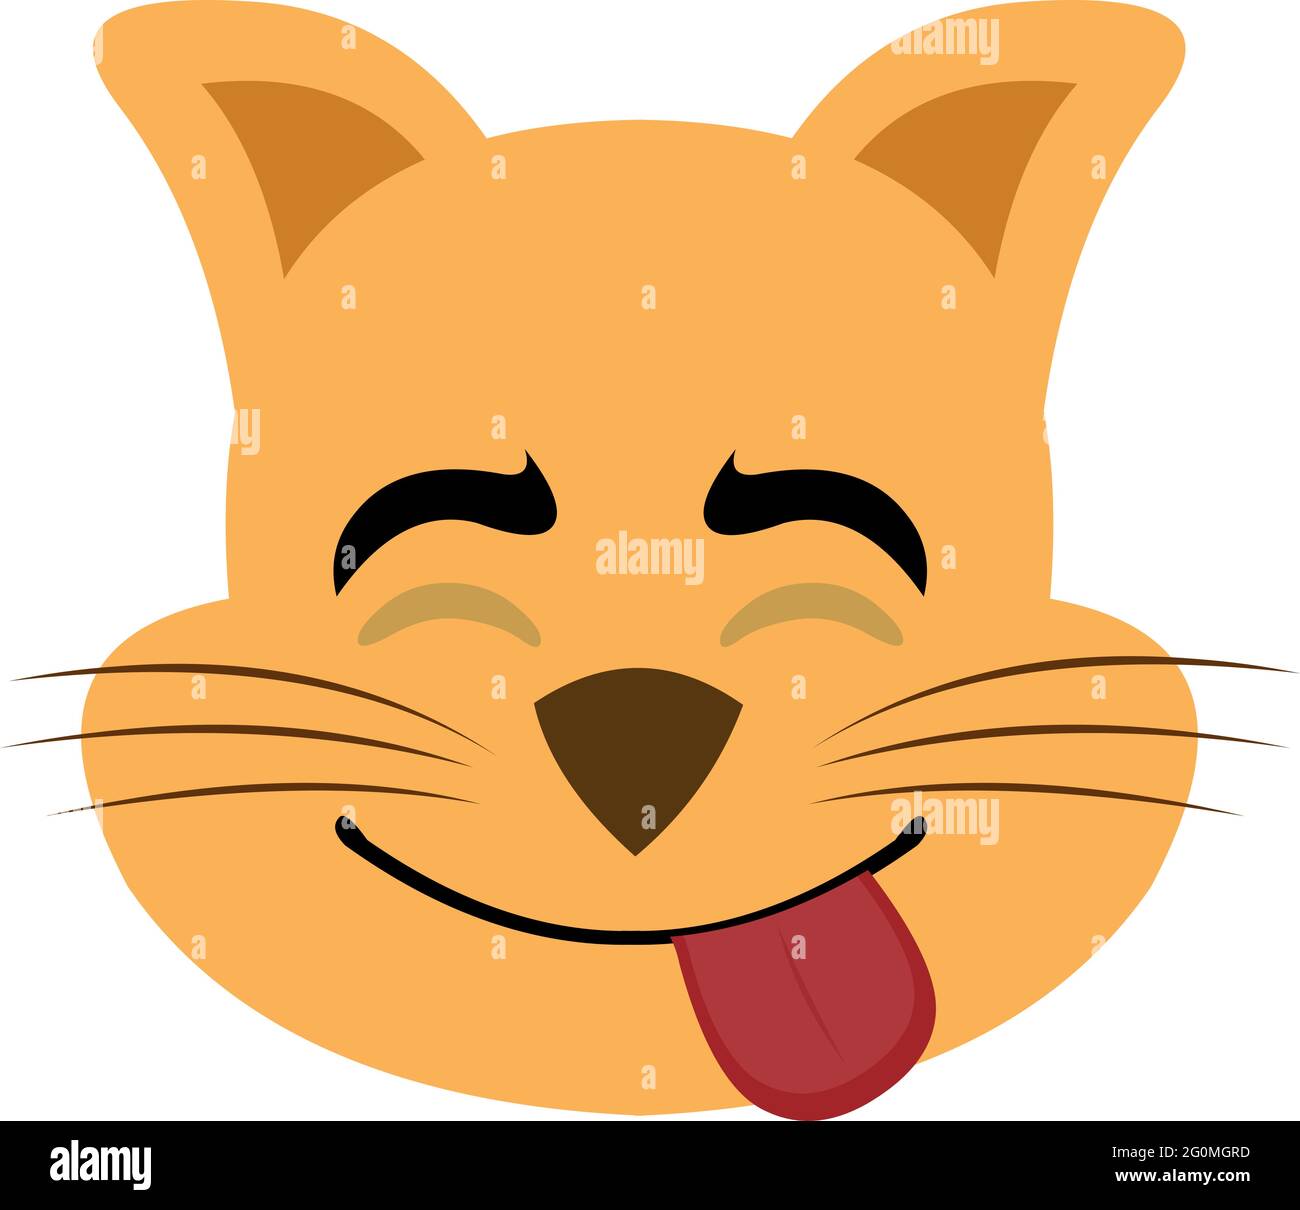 Vector emoticon illustration of a cartoon cat's face with a happy expression Stock Vector